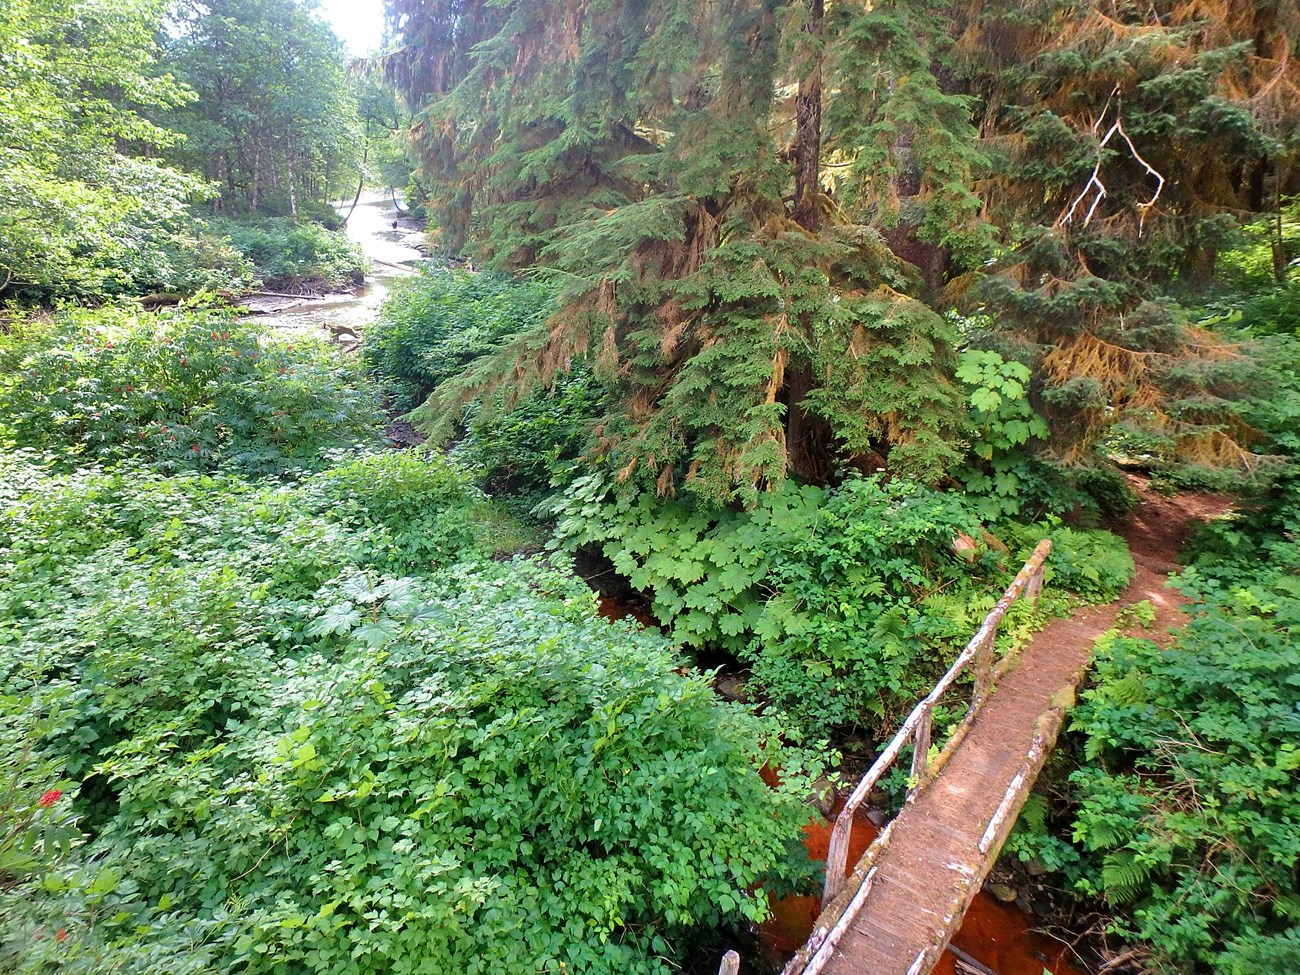 A lush, green forest with a creek running through it and a wooden footbridge.